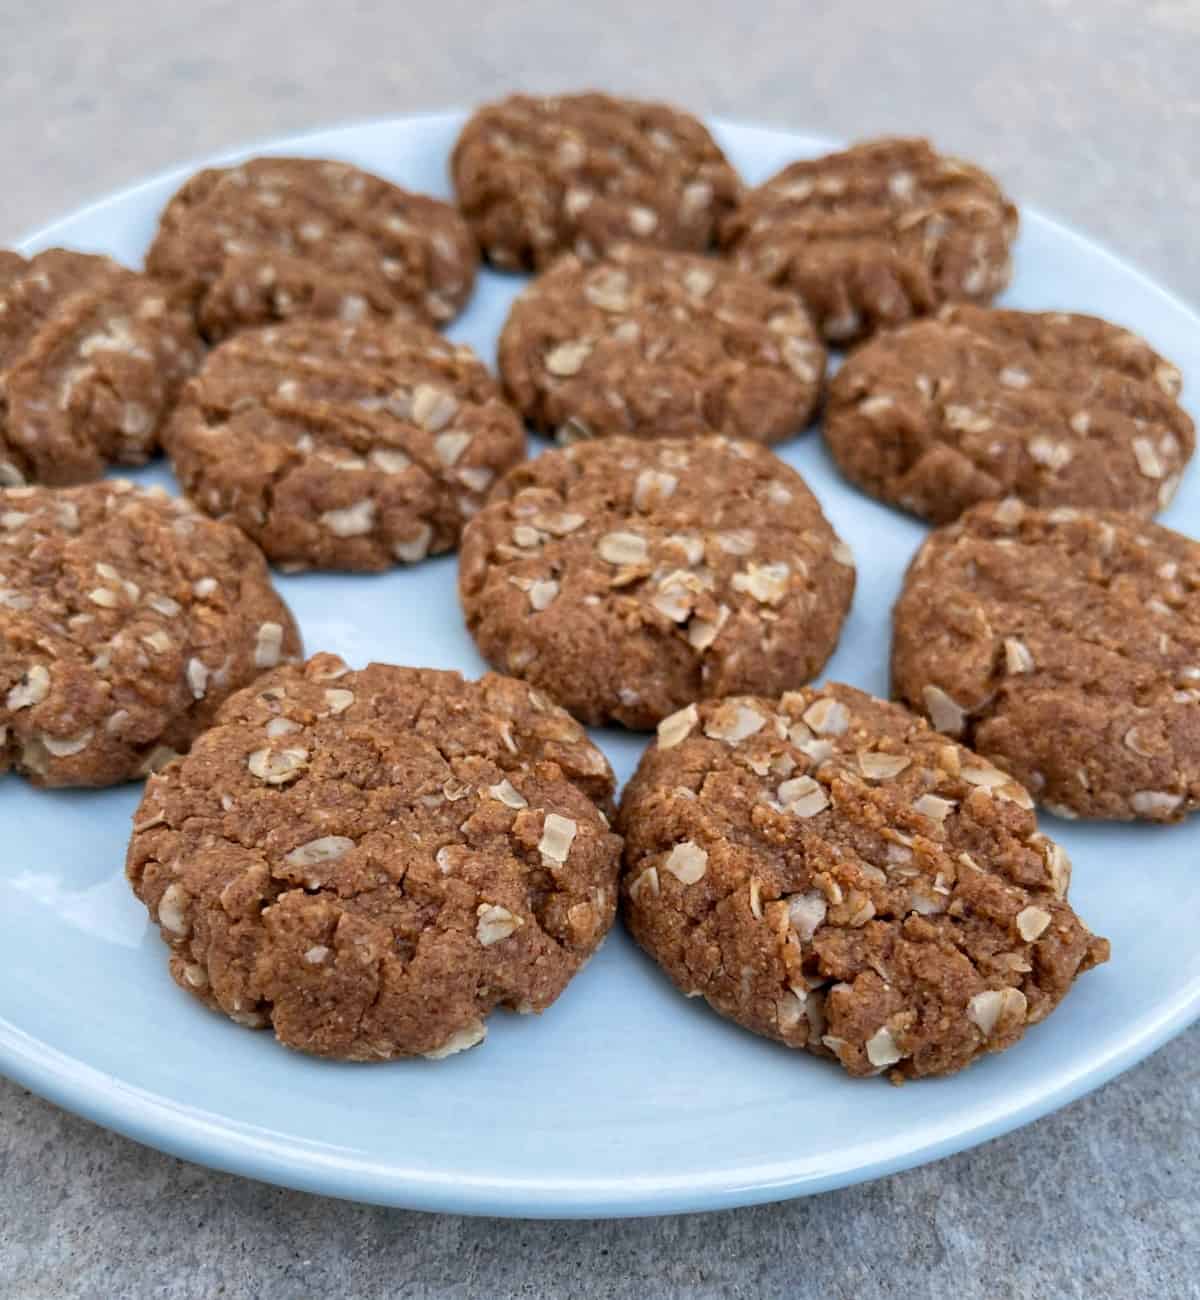 Soft and chewy almond butter cookies on blue serving plate.